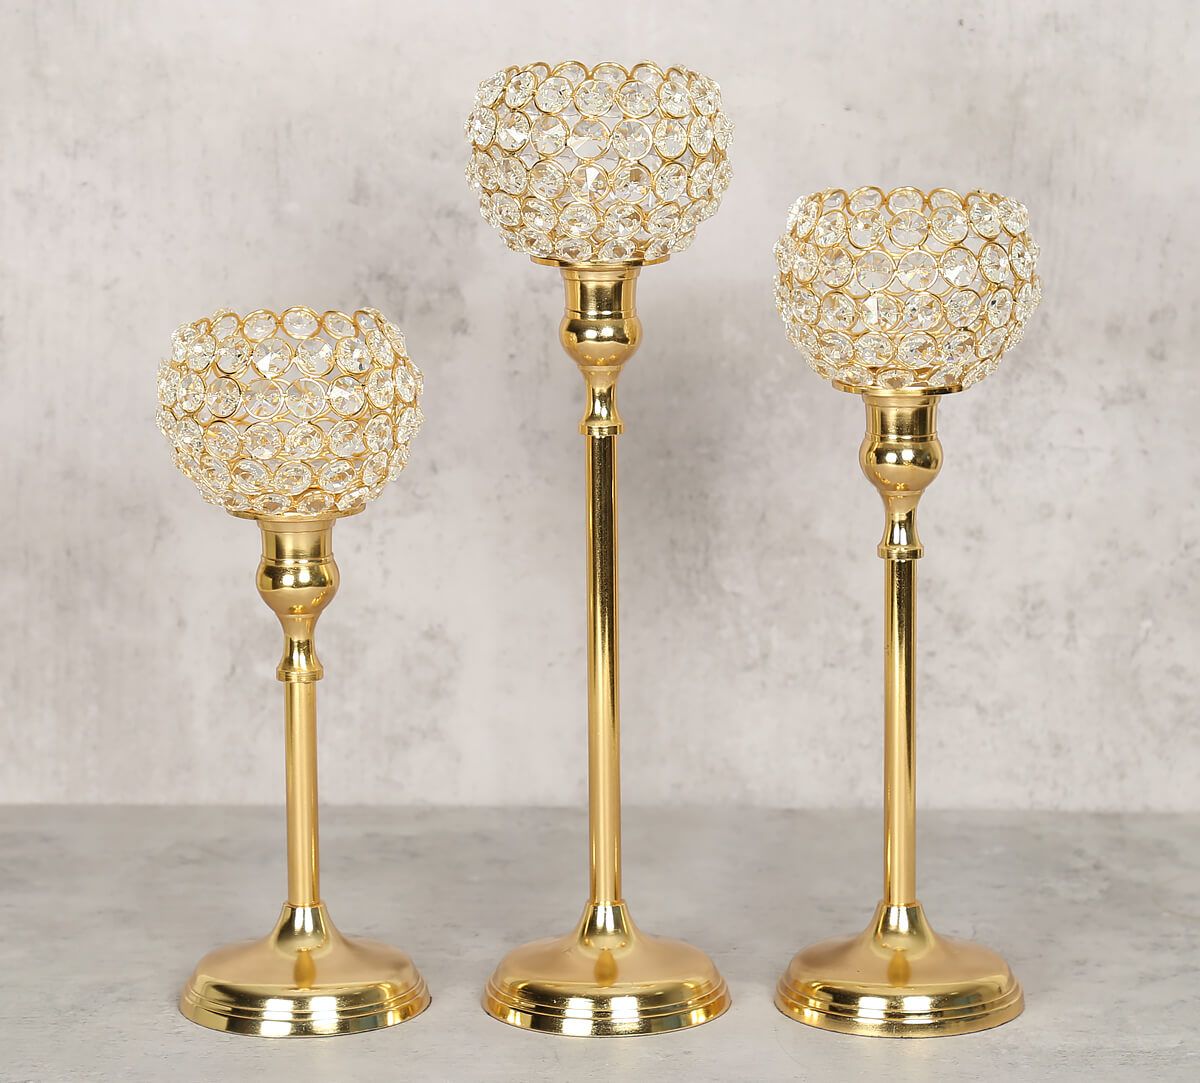 3 SIZES; NEW IN BOX. MADE IN INDIA UNIQUE  BRASS CANDLE HOLDERS SET OF 3 